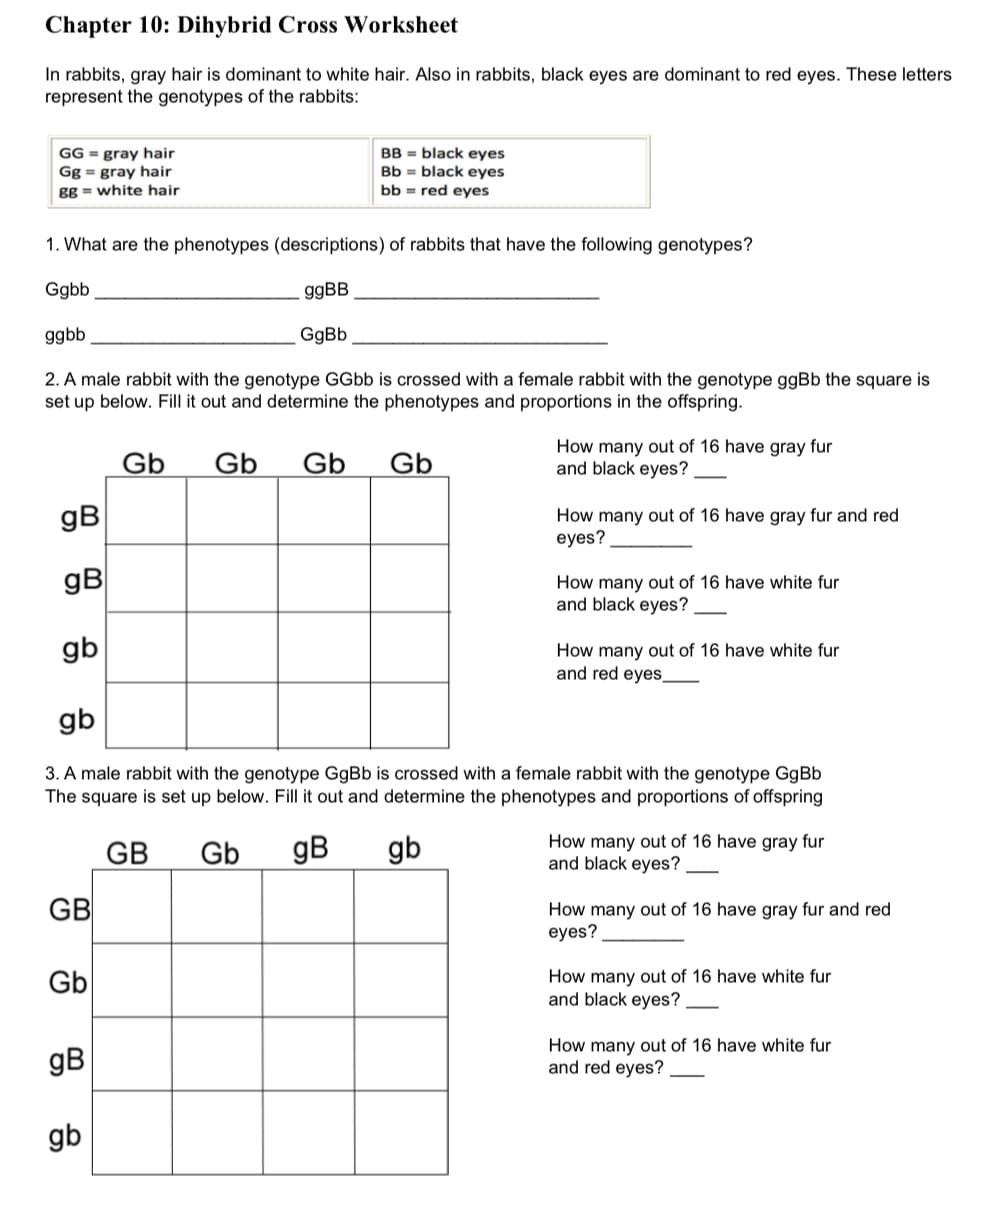 Chapter 10: Dihybrid Cross Worksheet
In rabbits, gray hair is dominant to white hair. Also in rabbits, black eyes are dominant to red eyes. These letters
represent the genotypes of the rabbits:
GG = gray hair
Gg = gray hair
gg = white hair
BB = black eyes
Bb = black eyes
bb = red eyes
1. What are the phenotypes (descriptions) of rabbits that have the following genotypes?
Ggbb
ggbb
GgBb
2. A male rabbit with the genotype GGbb is crossed with a female rabbit with the genotype ggBb the square is
set up below. Fill it out and determine the phenotypes and proportions in the offspring.
Gb
Gb
How many out of 16 have gray fur
and black eyes?
gB
How many out of 16 have gray fur and red
eyes?
gB
How many out of 16 have white fur
and black eyes?
gb
How many out of 16 have white fur
and red eyes
gb
3. A male rabbit with the genotype GgBb is crossed with a female rabbit with the genotype GgBb
The square is set up below. Fill it out and determine the phenotypes and proportions of offspring
GB
Gb
gB
gb
How many out of 16 have gray fur
and black eyes?
GB
How many out of 16 have gray fur and red
eyes?
Gb
How many out of 16 have white fur
and black eyes?
gB
How many out of 16 have white fur
and red eyes?
gb
